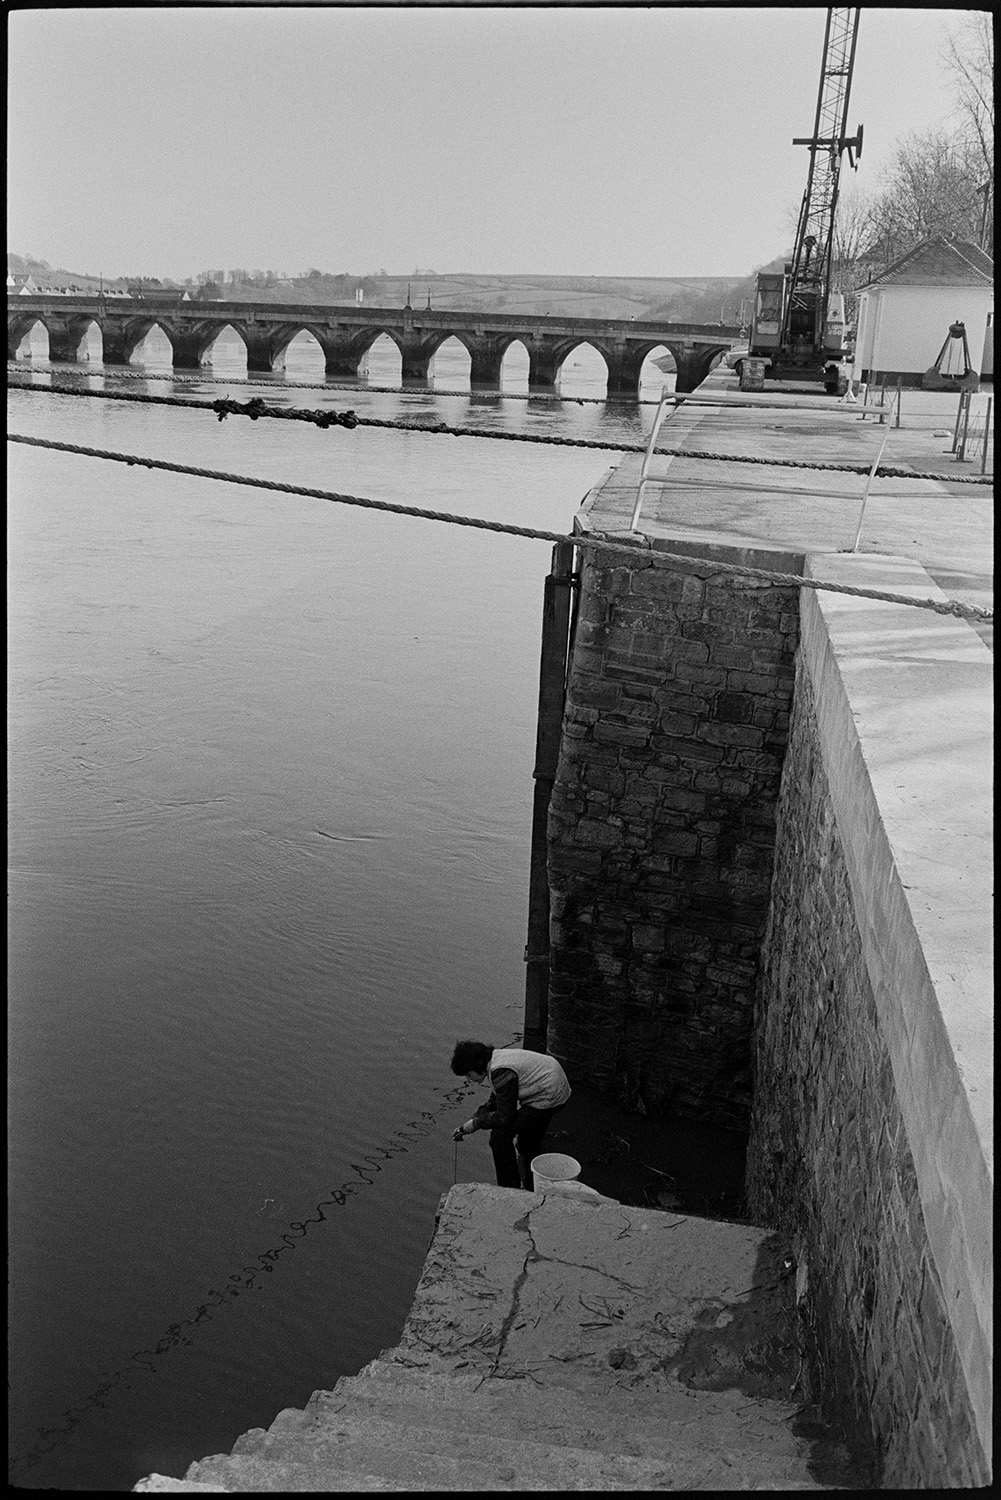 Boy fishing from quay near bridge. <br />
[A boy fishing at the bottom of steps leading down to the River Torridge at Bideford Quay. Bideford Long Bridge, also known as Bideford Old Bridge, can be seen in the background.]